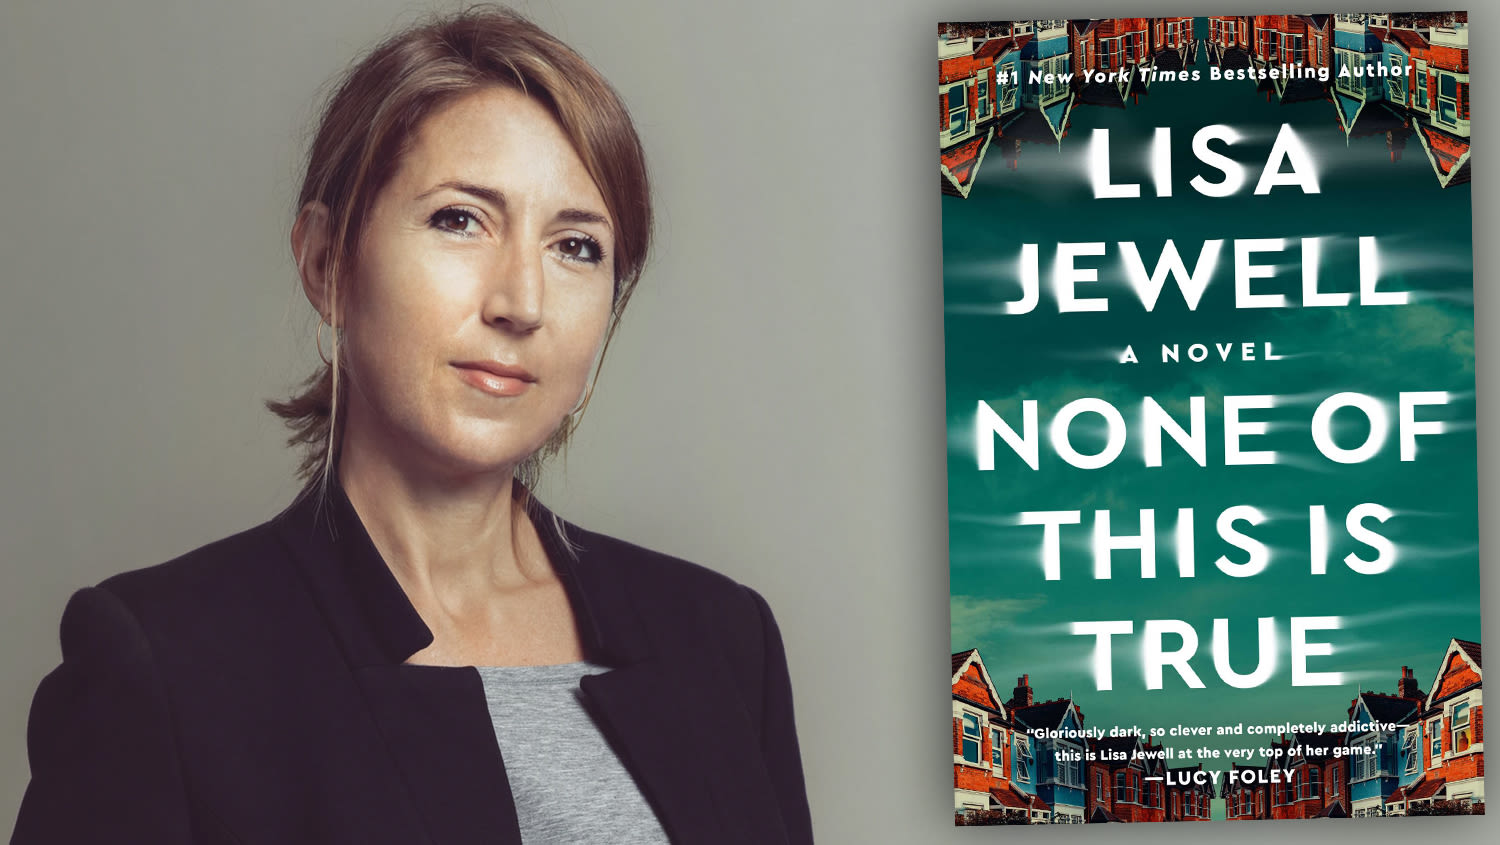 Eleanor Burgess Tapped To Pen Feature Adaptation Of Lisa Jewell’s Thriller ‘None Of This Is True’ For Netflix